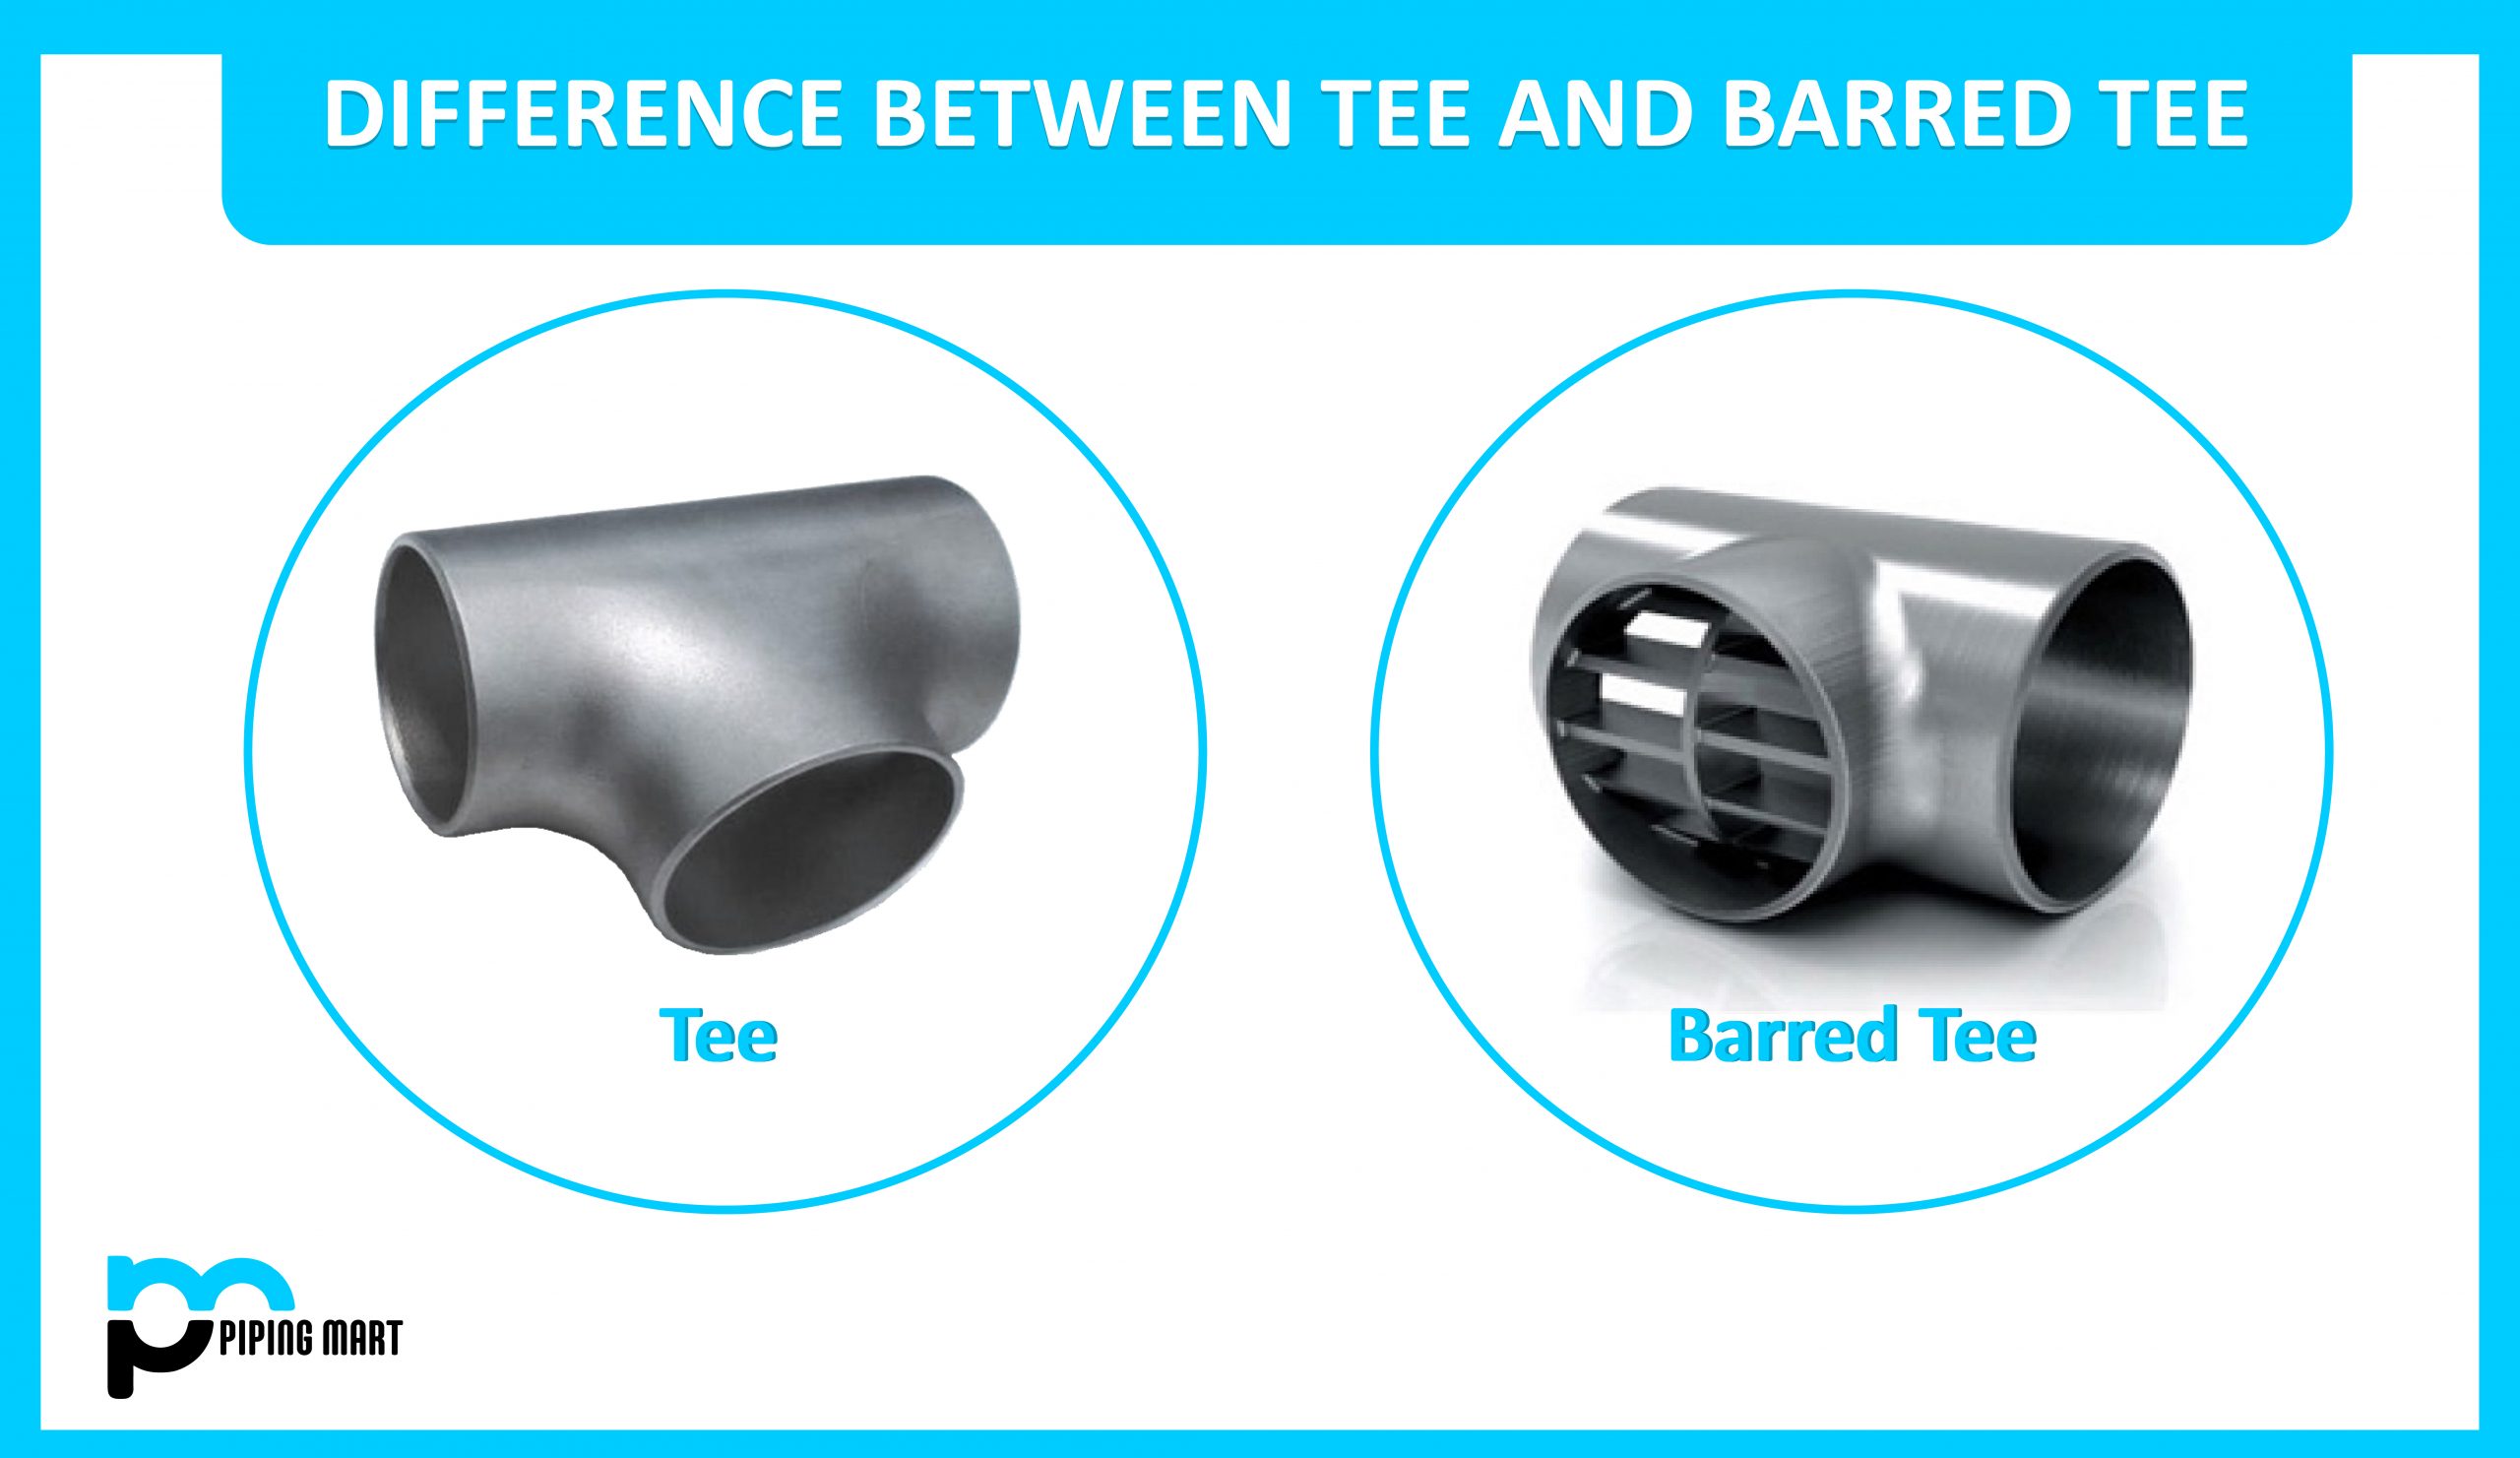 Difference between Tee and Barred Tee